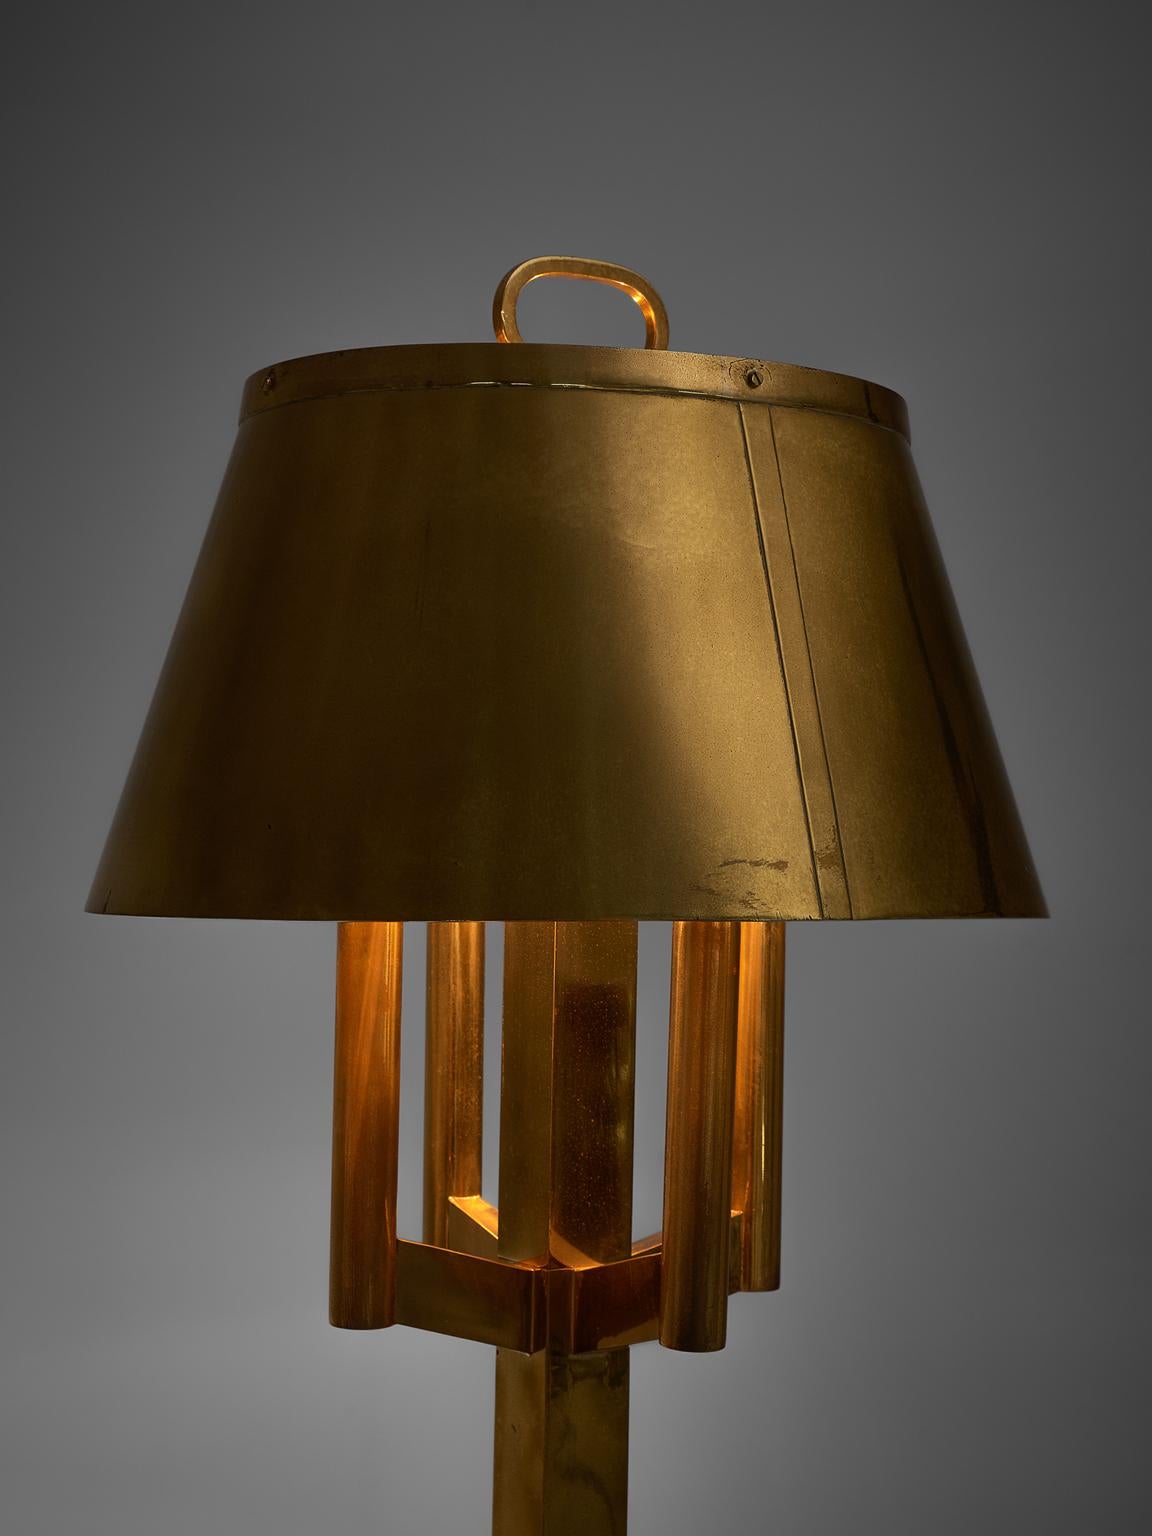 Italian Solid Brass Table Lamp, 1940s